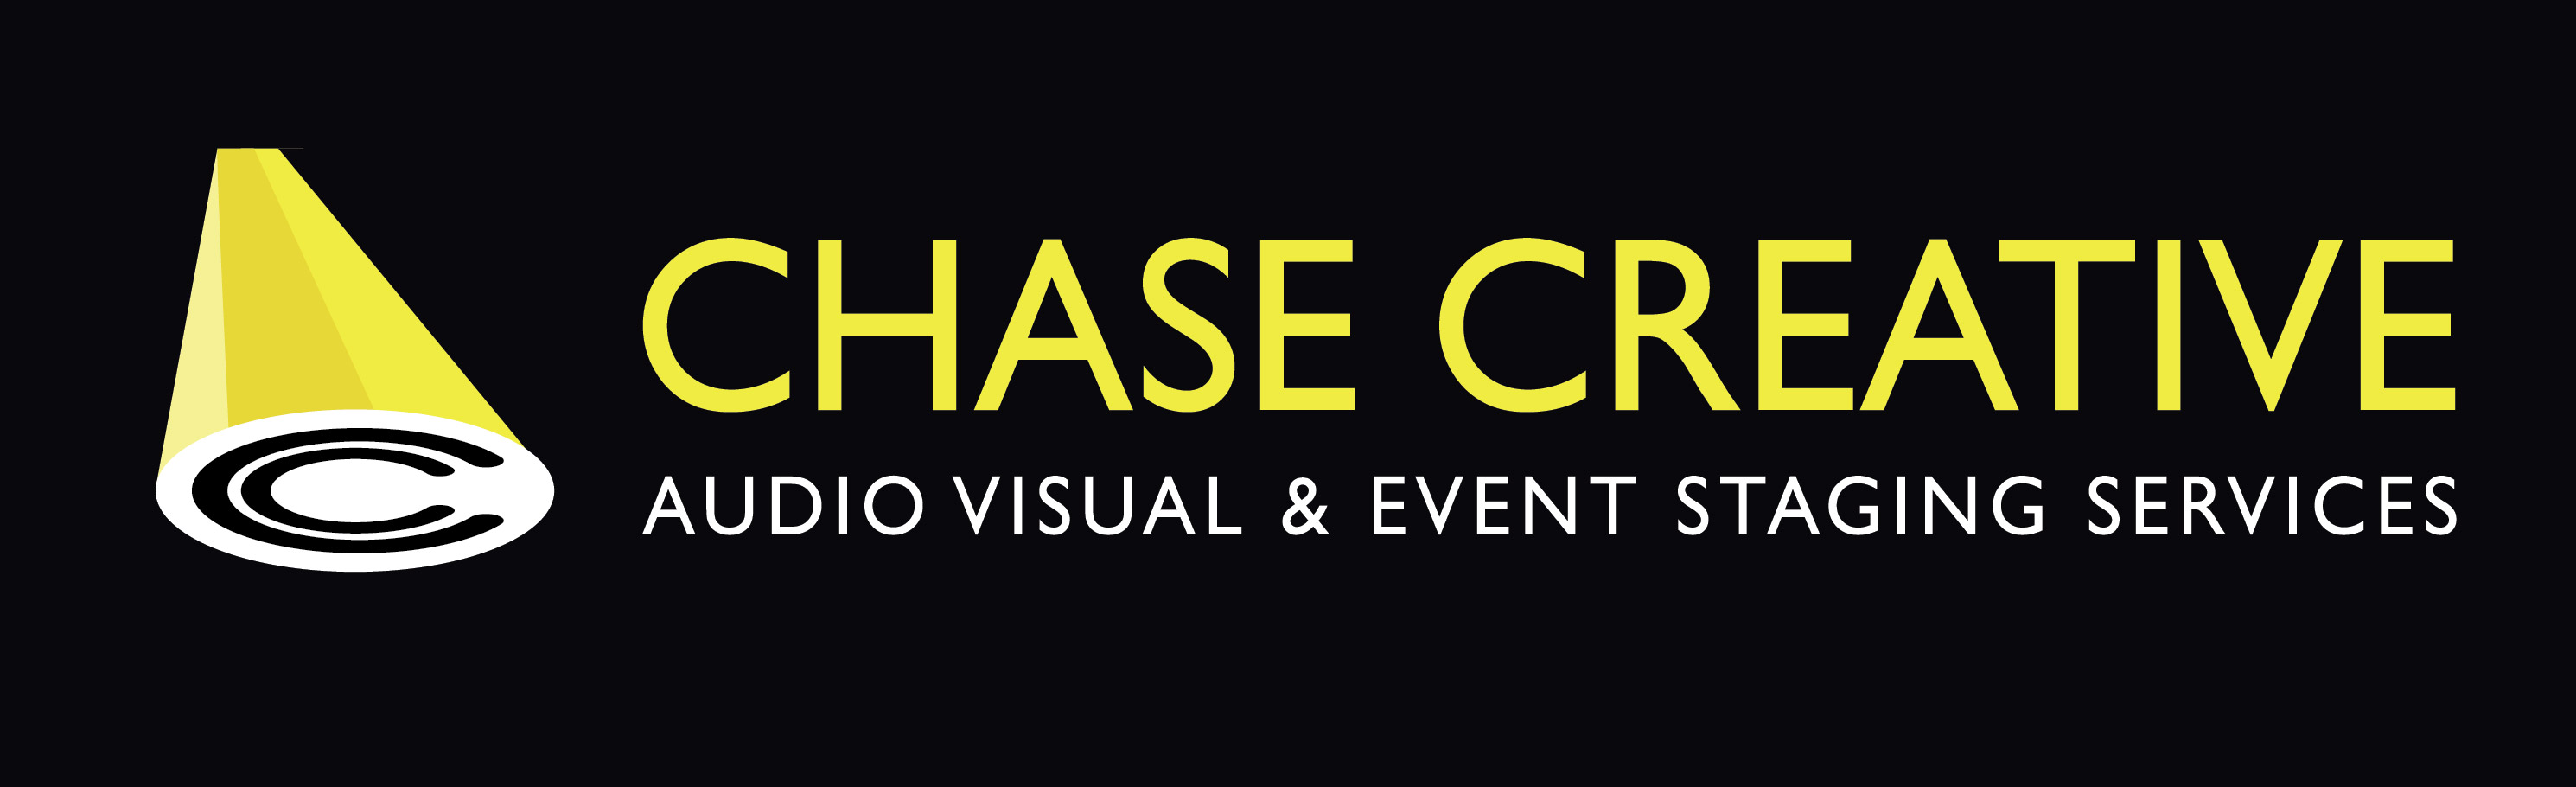 New Look for Chase Creative